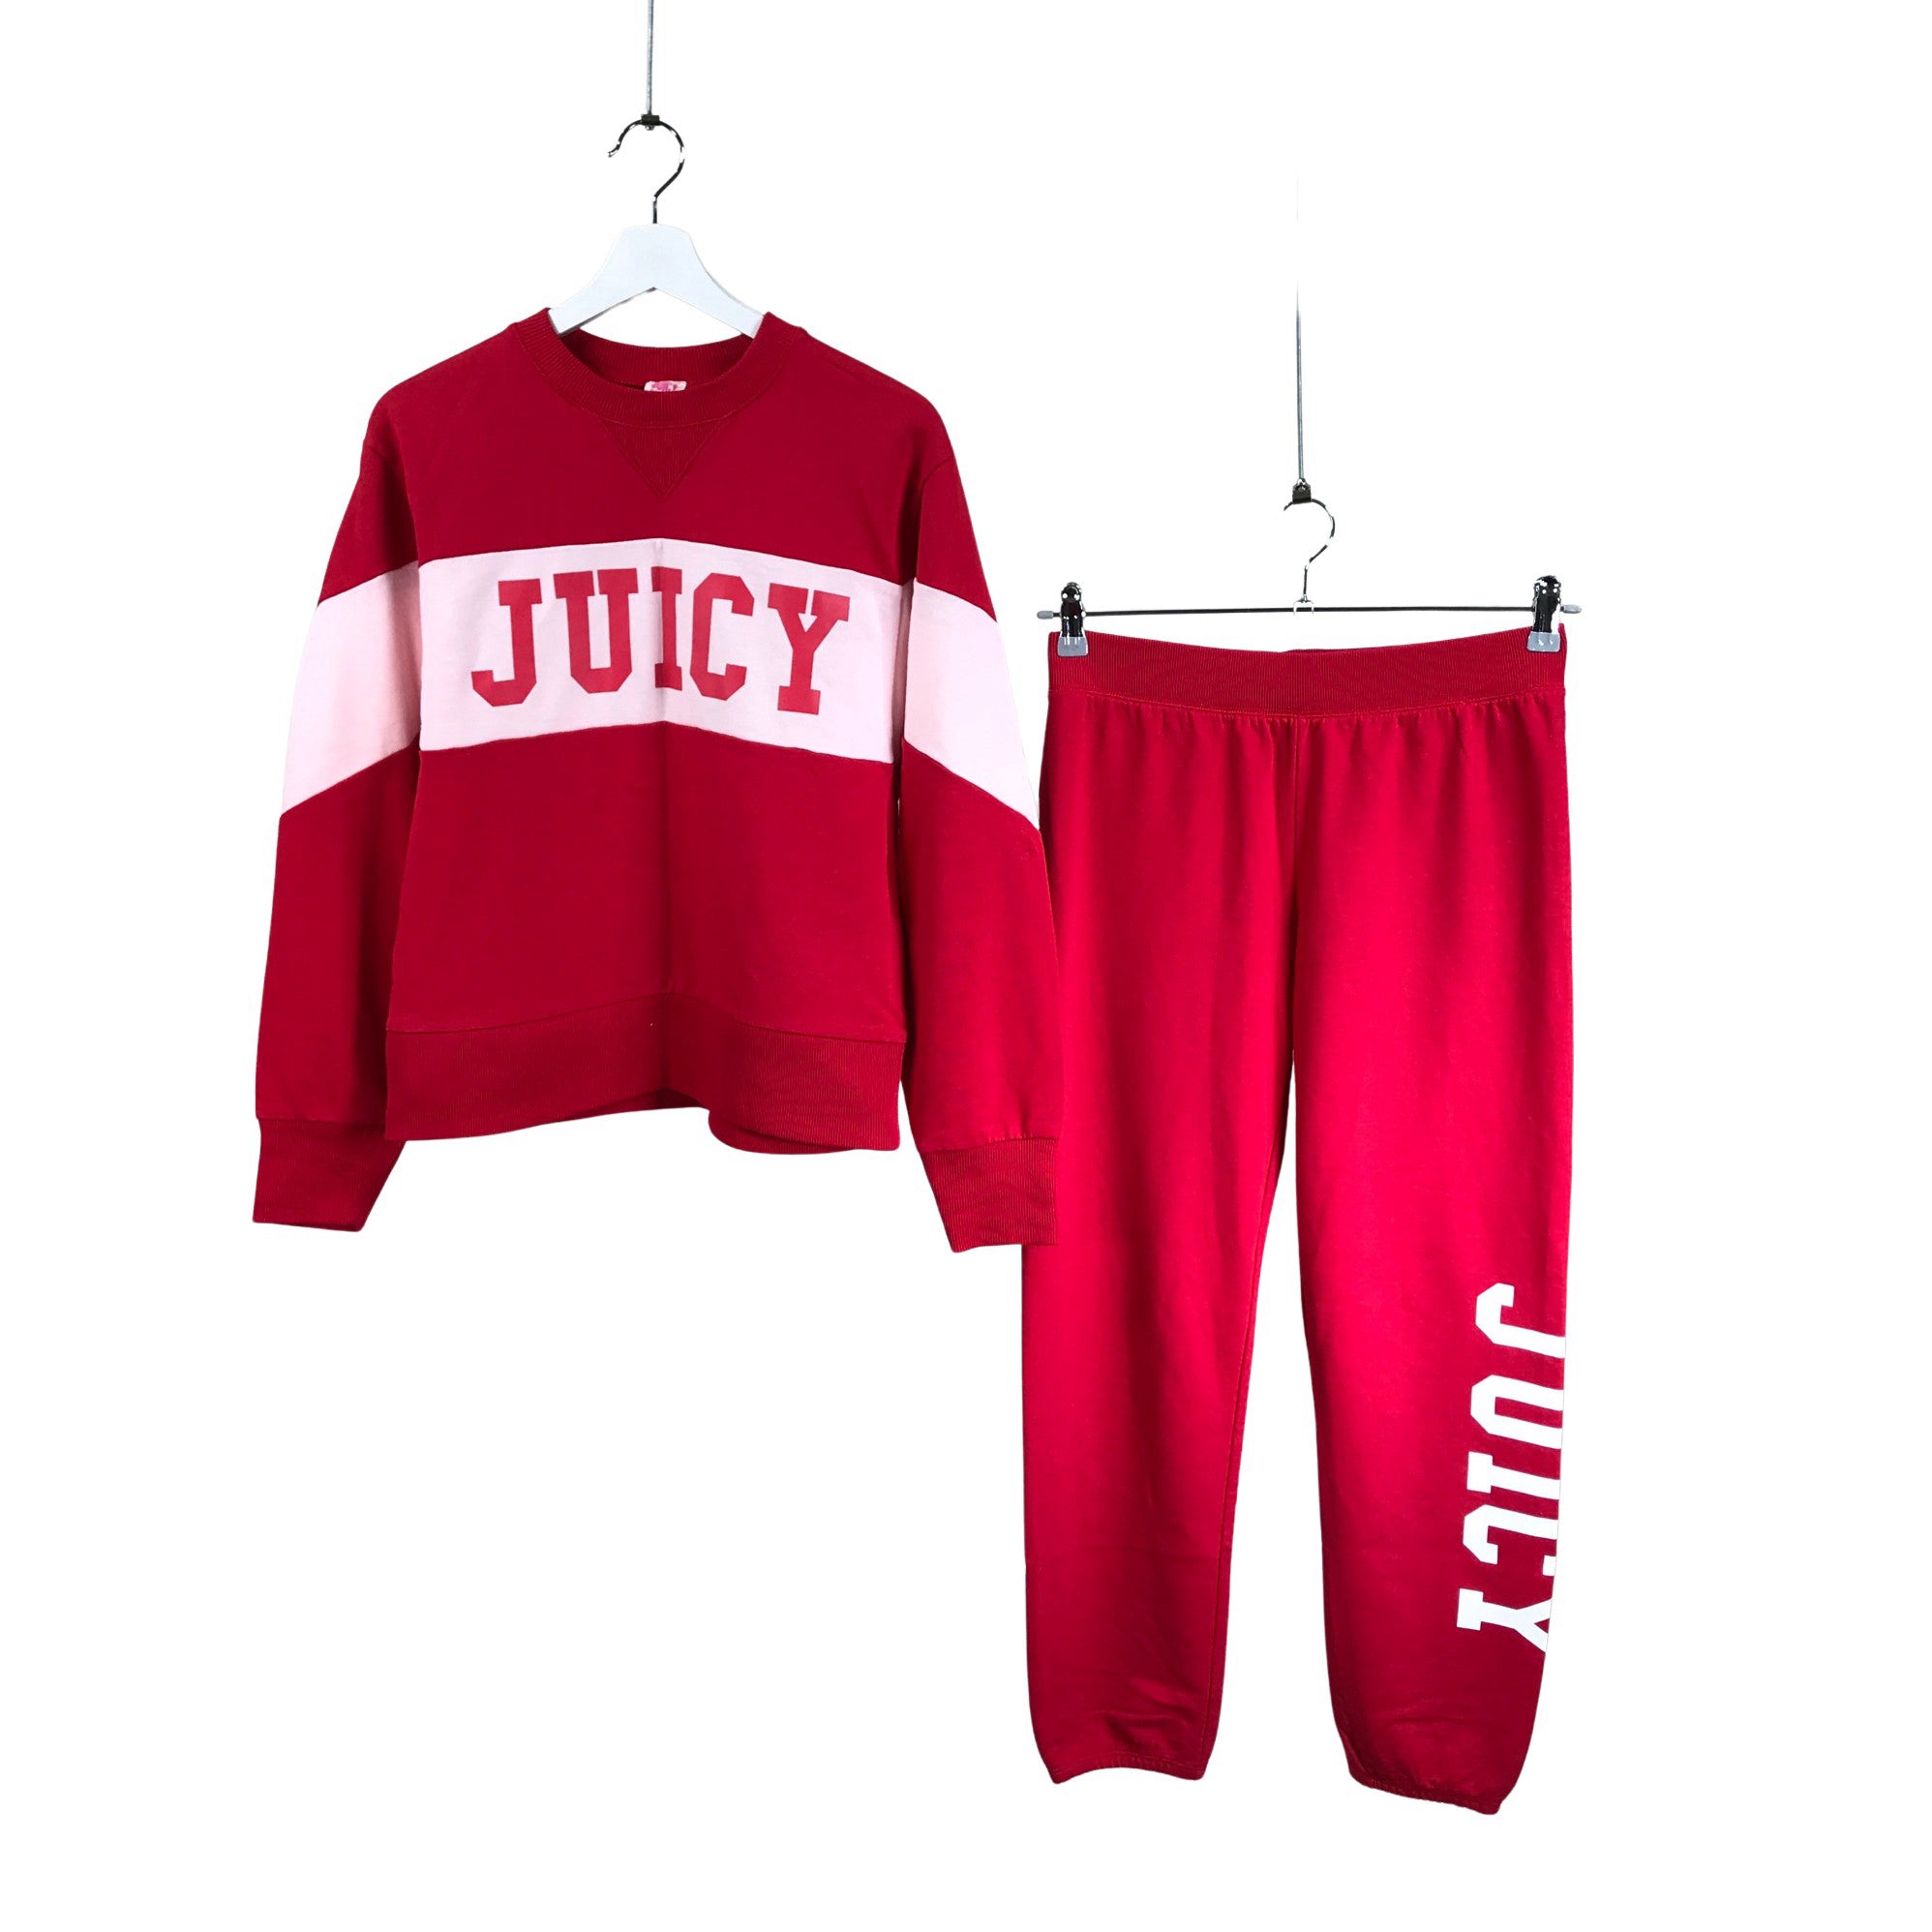 Women's Juicy Couture Sweatshirt and pants set, size 34 (Red) | Emmy